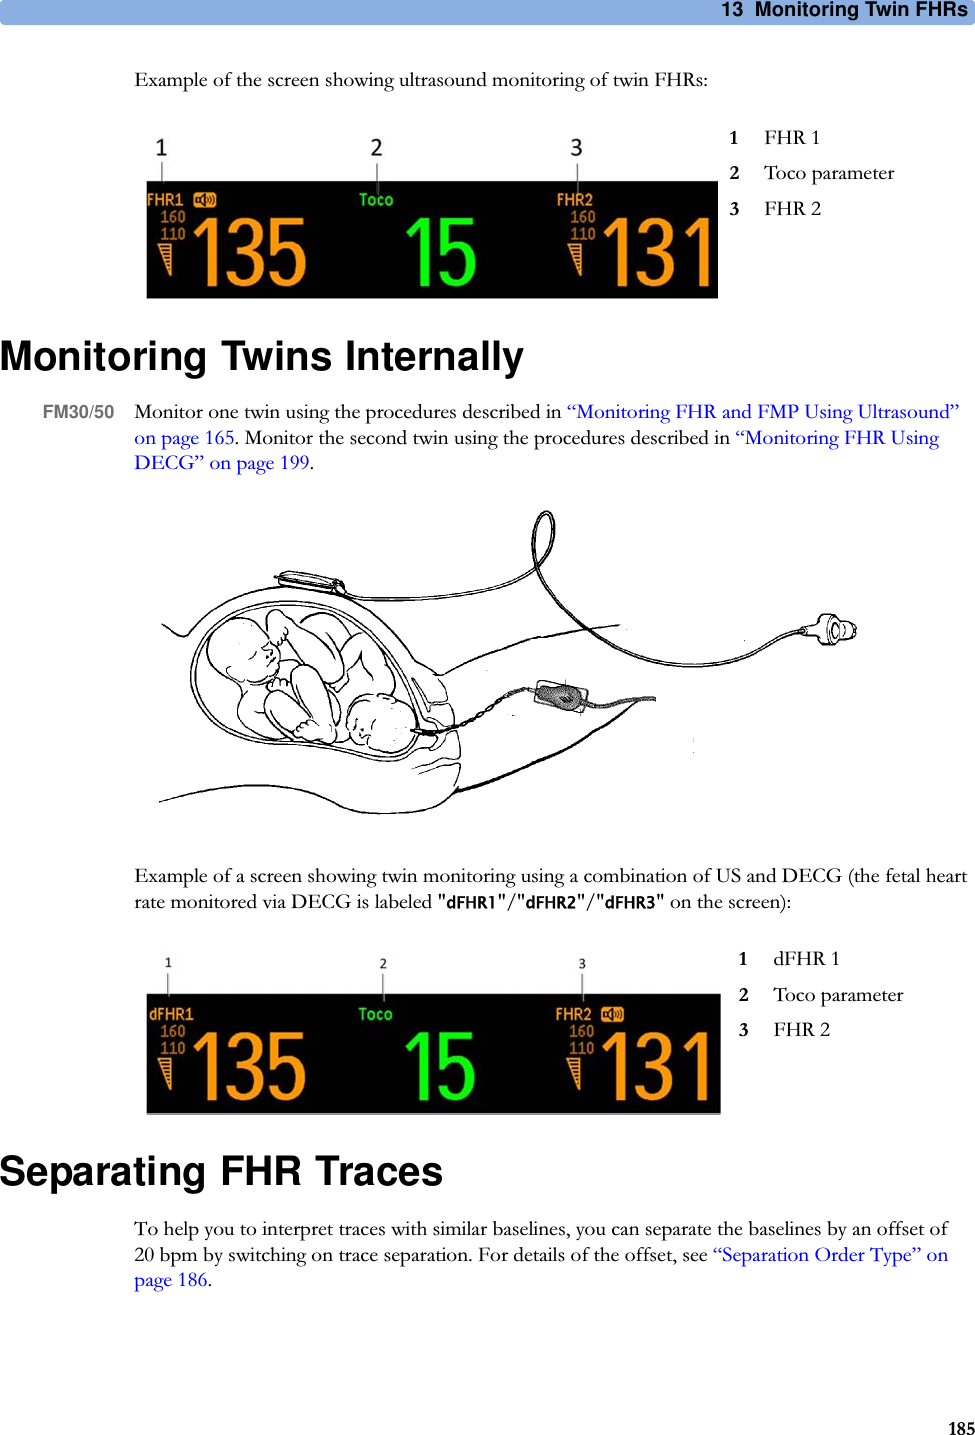 13  Monitoring Twin FHRs185Example of the screen showing ultrasound monitoring of twin FHRs:Monitoring Twins InternallyFM30/50 Monitor one twin using the procedures described in “Monitoring FHR and FMP Using Ultrasound” on page 165. Monitor the second twin using the procedures described in “Monitoring FHR Using DECG” on page 199.Example of a screen showing twin monitoring using a combination of US and DECG (the fetal heart rate monitored via DECG is labeled &quot;dFHR1&quot;/&quot;dFHR2&quot;/&quot;dFHR3&quot; on the screen):Separating FHR TracesTo help you to interpret traces with similar baselines, you can separate the baselines by an offset of 20 bpm by switching on trace separation. For details of the offset, see “Separation Order Type” on page 186.1FHR 12Toco parameter3FHR 21dFHR 12Toco parameter3FHR 2